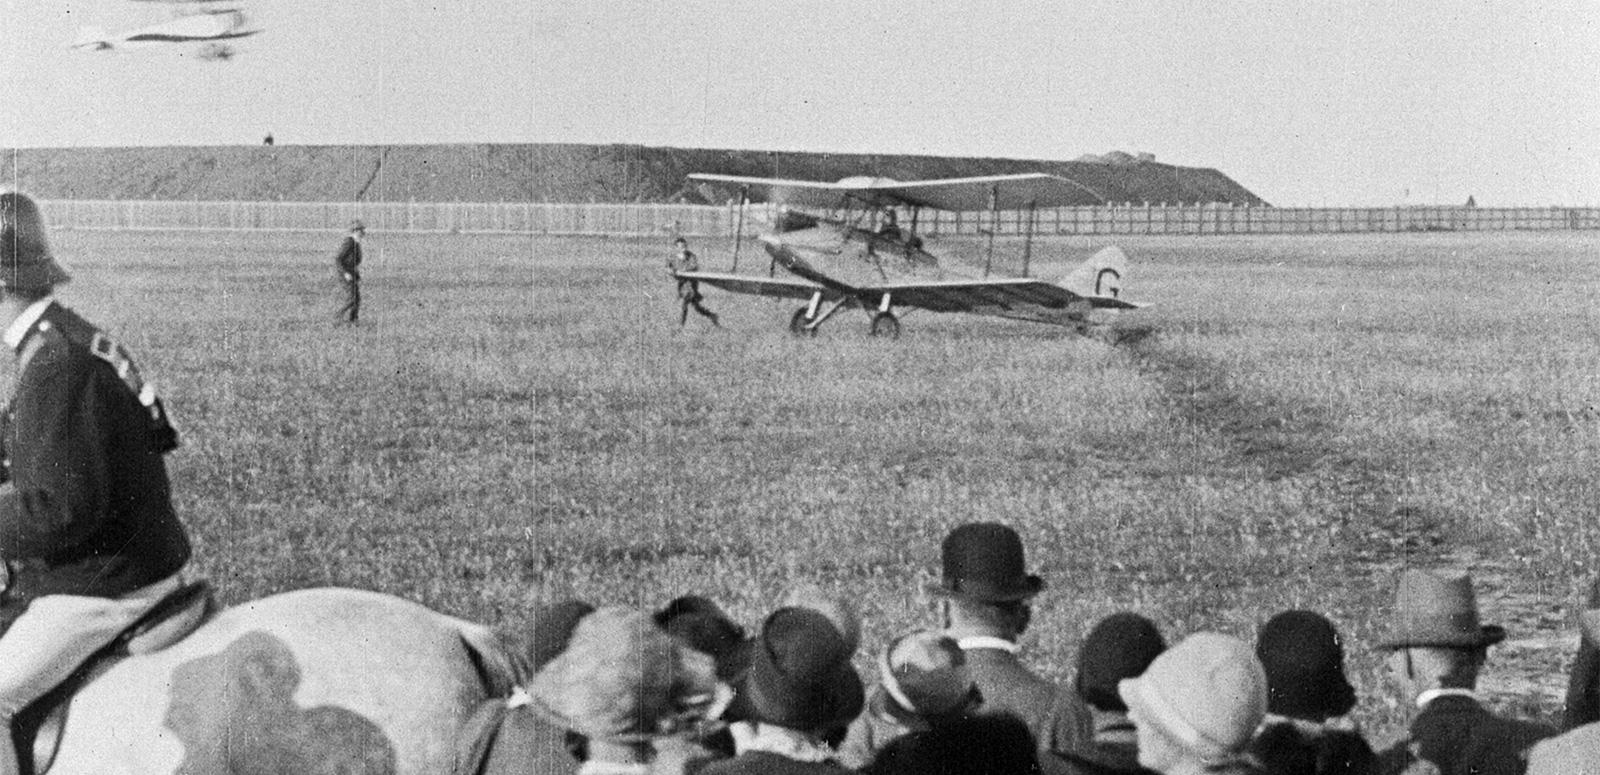 An early 20th century biplane lands in a field, watched by a crowd of spectators